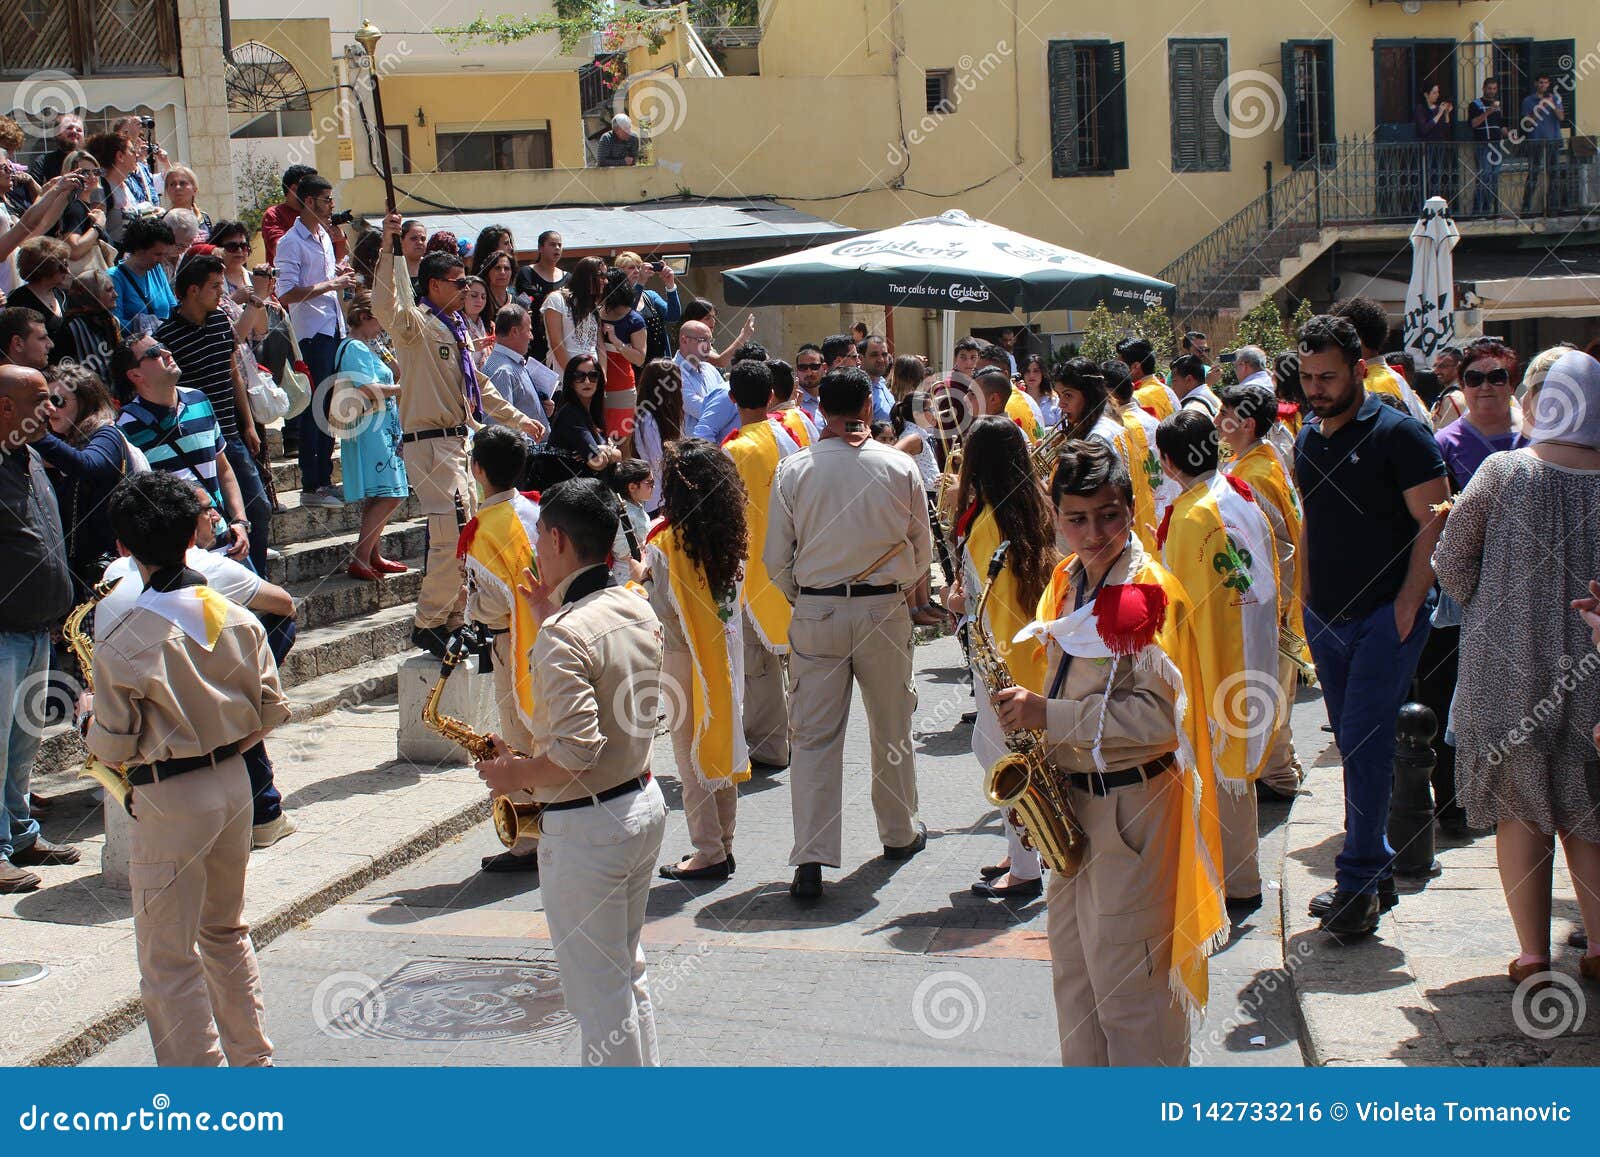 Traditional Parade for the Feast of the Annunciation in Nazareth